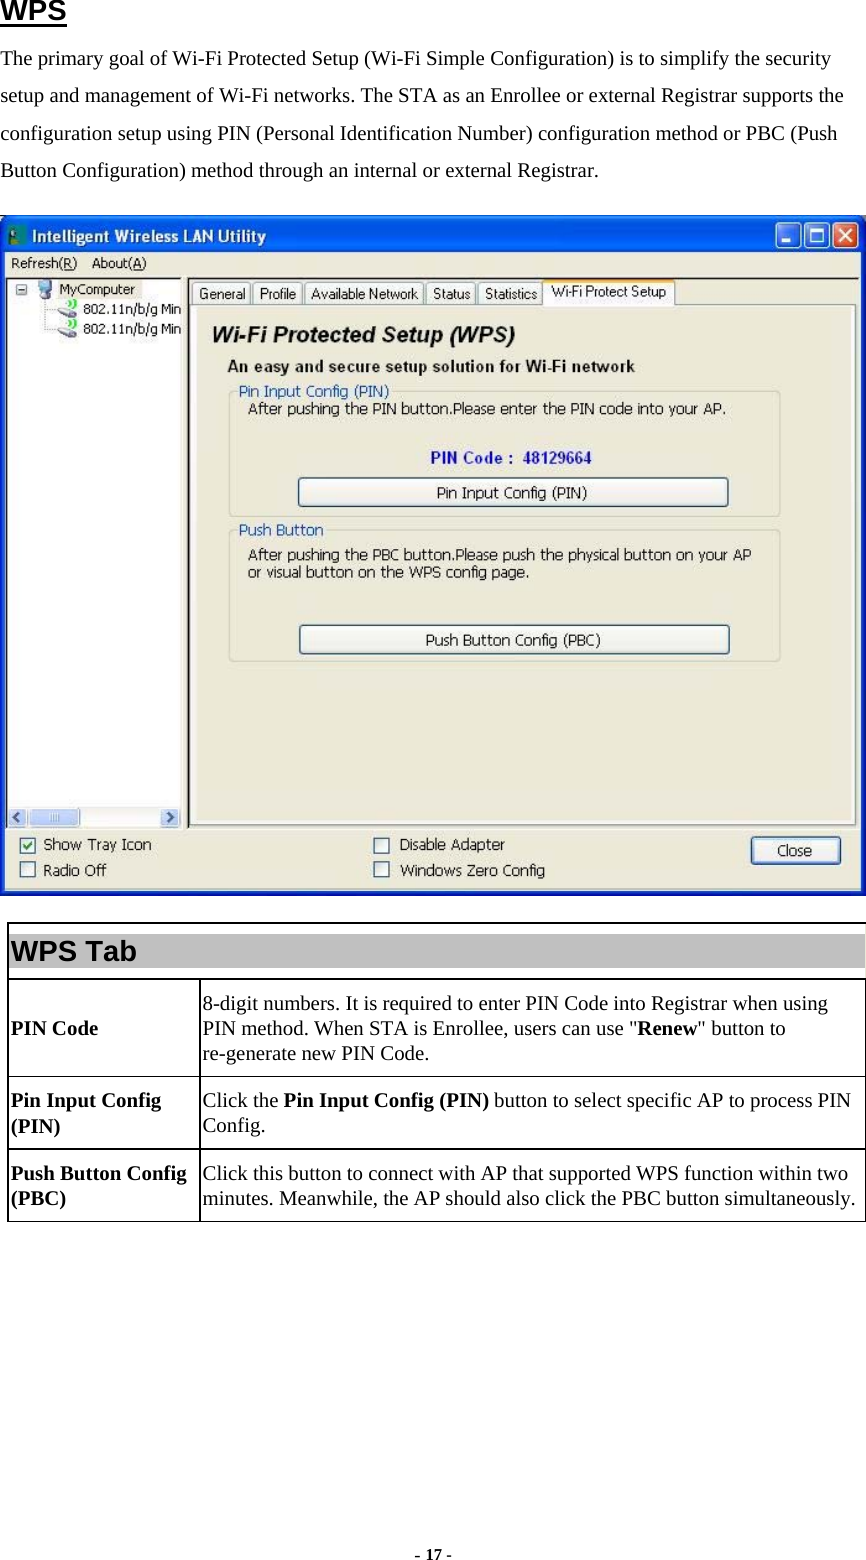  - 17 - WPS The primary goal of Wi-Fi Protected Setup (Wi-Fi Simple Configuration) is to simplify the security setup and management of Wi-Fi networks. The STA as an Enrollee or external Registrar supports the configuration setup using PIN (Personal Identification Number) configuration method or PBC (Push Button Configuration) method through an internal or external Registrar.  WPS Tab PIN Code  8-digit numbers. It is required to enter PIN Code into Registrar when using PIN method. When STA is Enrollee, users can use &quot;Renew&quot; button to re-generate new PIN Code. Pin Input Config (PIN)  Click the Pin Input Config (PIN) button to select specific AP to process PIN Config. Push Button Config (PBC)  Click this button to connect with AP that supported WPS function within two minutes. Meanwhile, the AP should also click the PBC button simultaneously. 